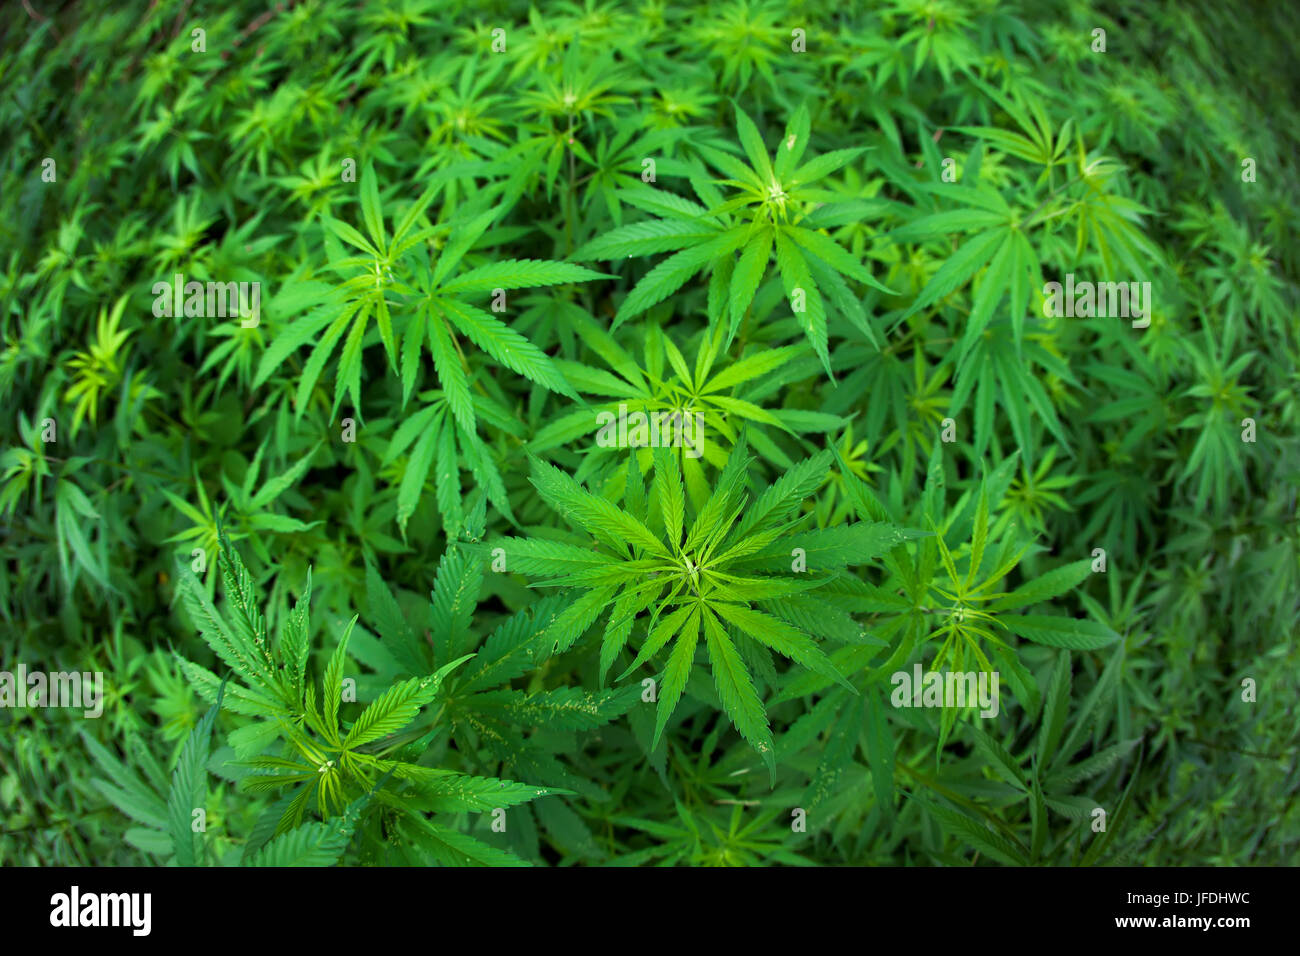 Cannabis growing in the field. Stock Photo